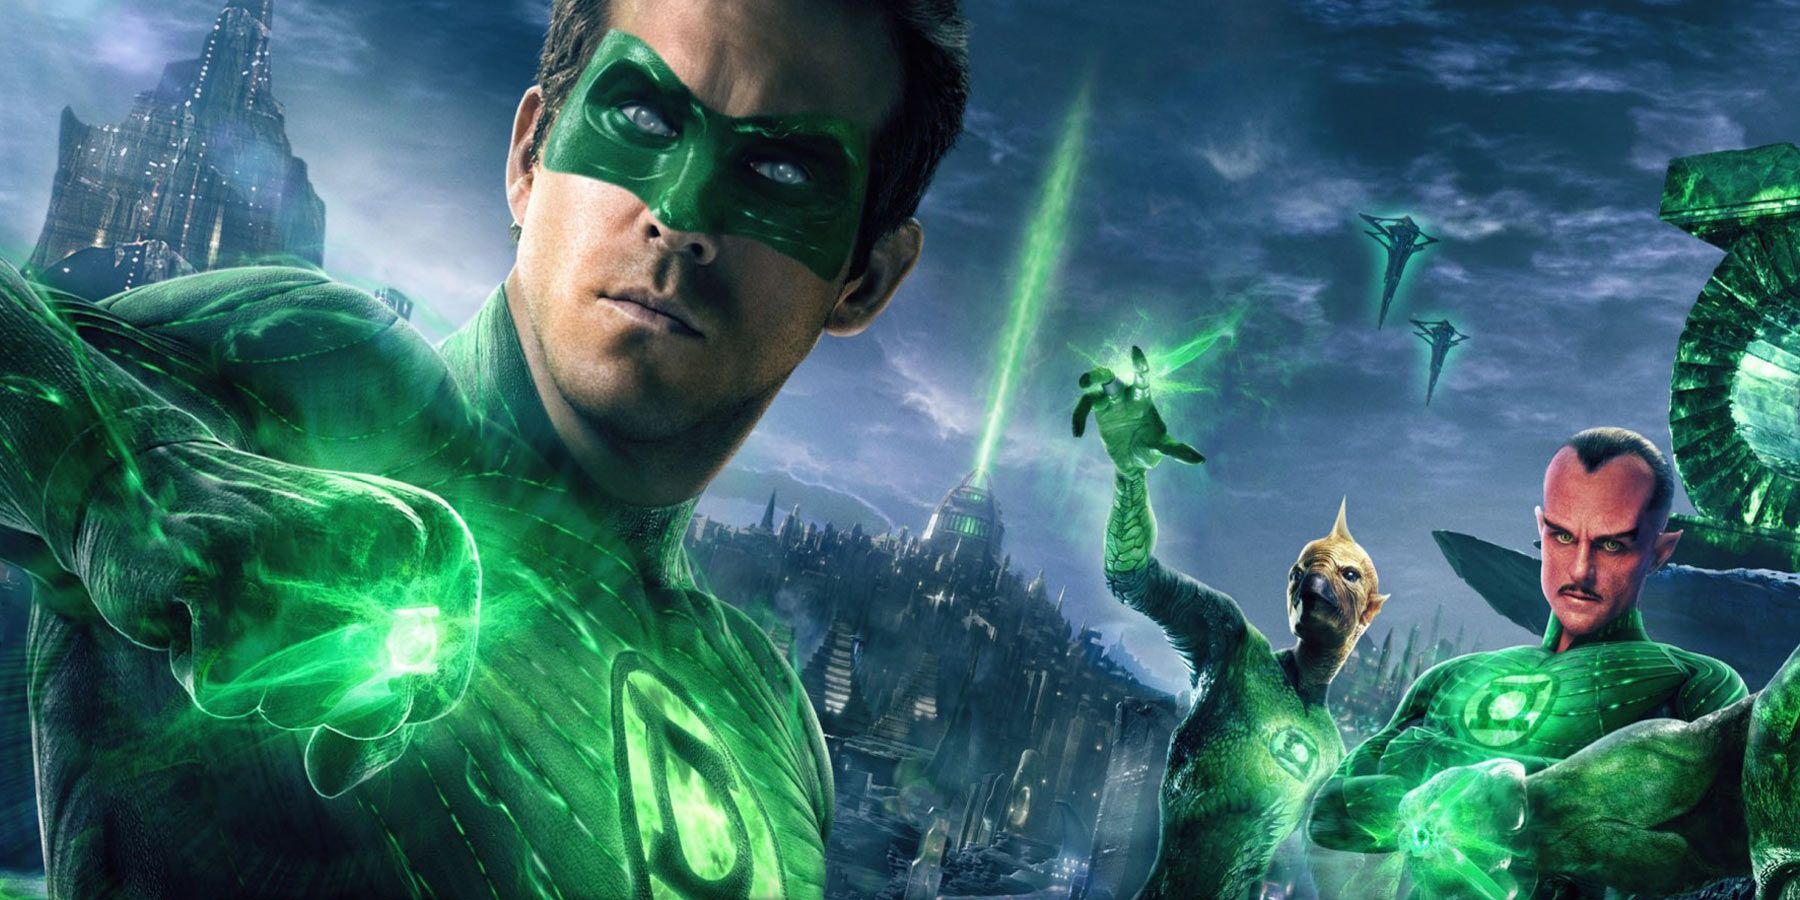 10 DC Movie Characters Who Could Jump to TV